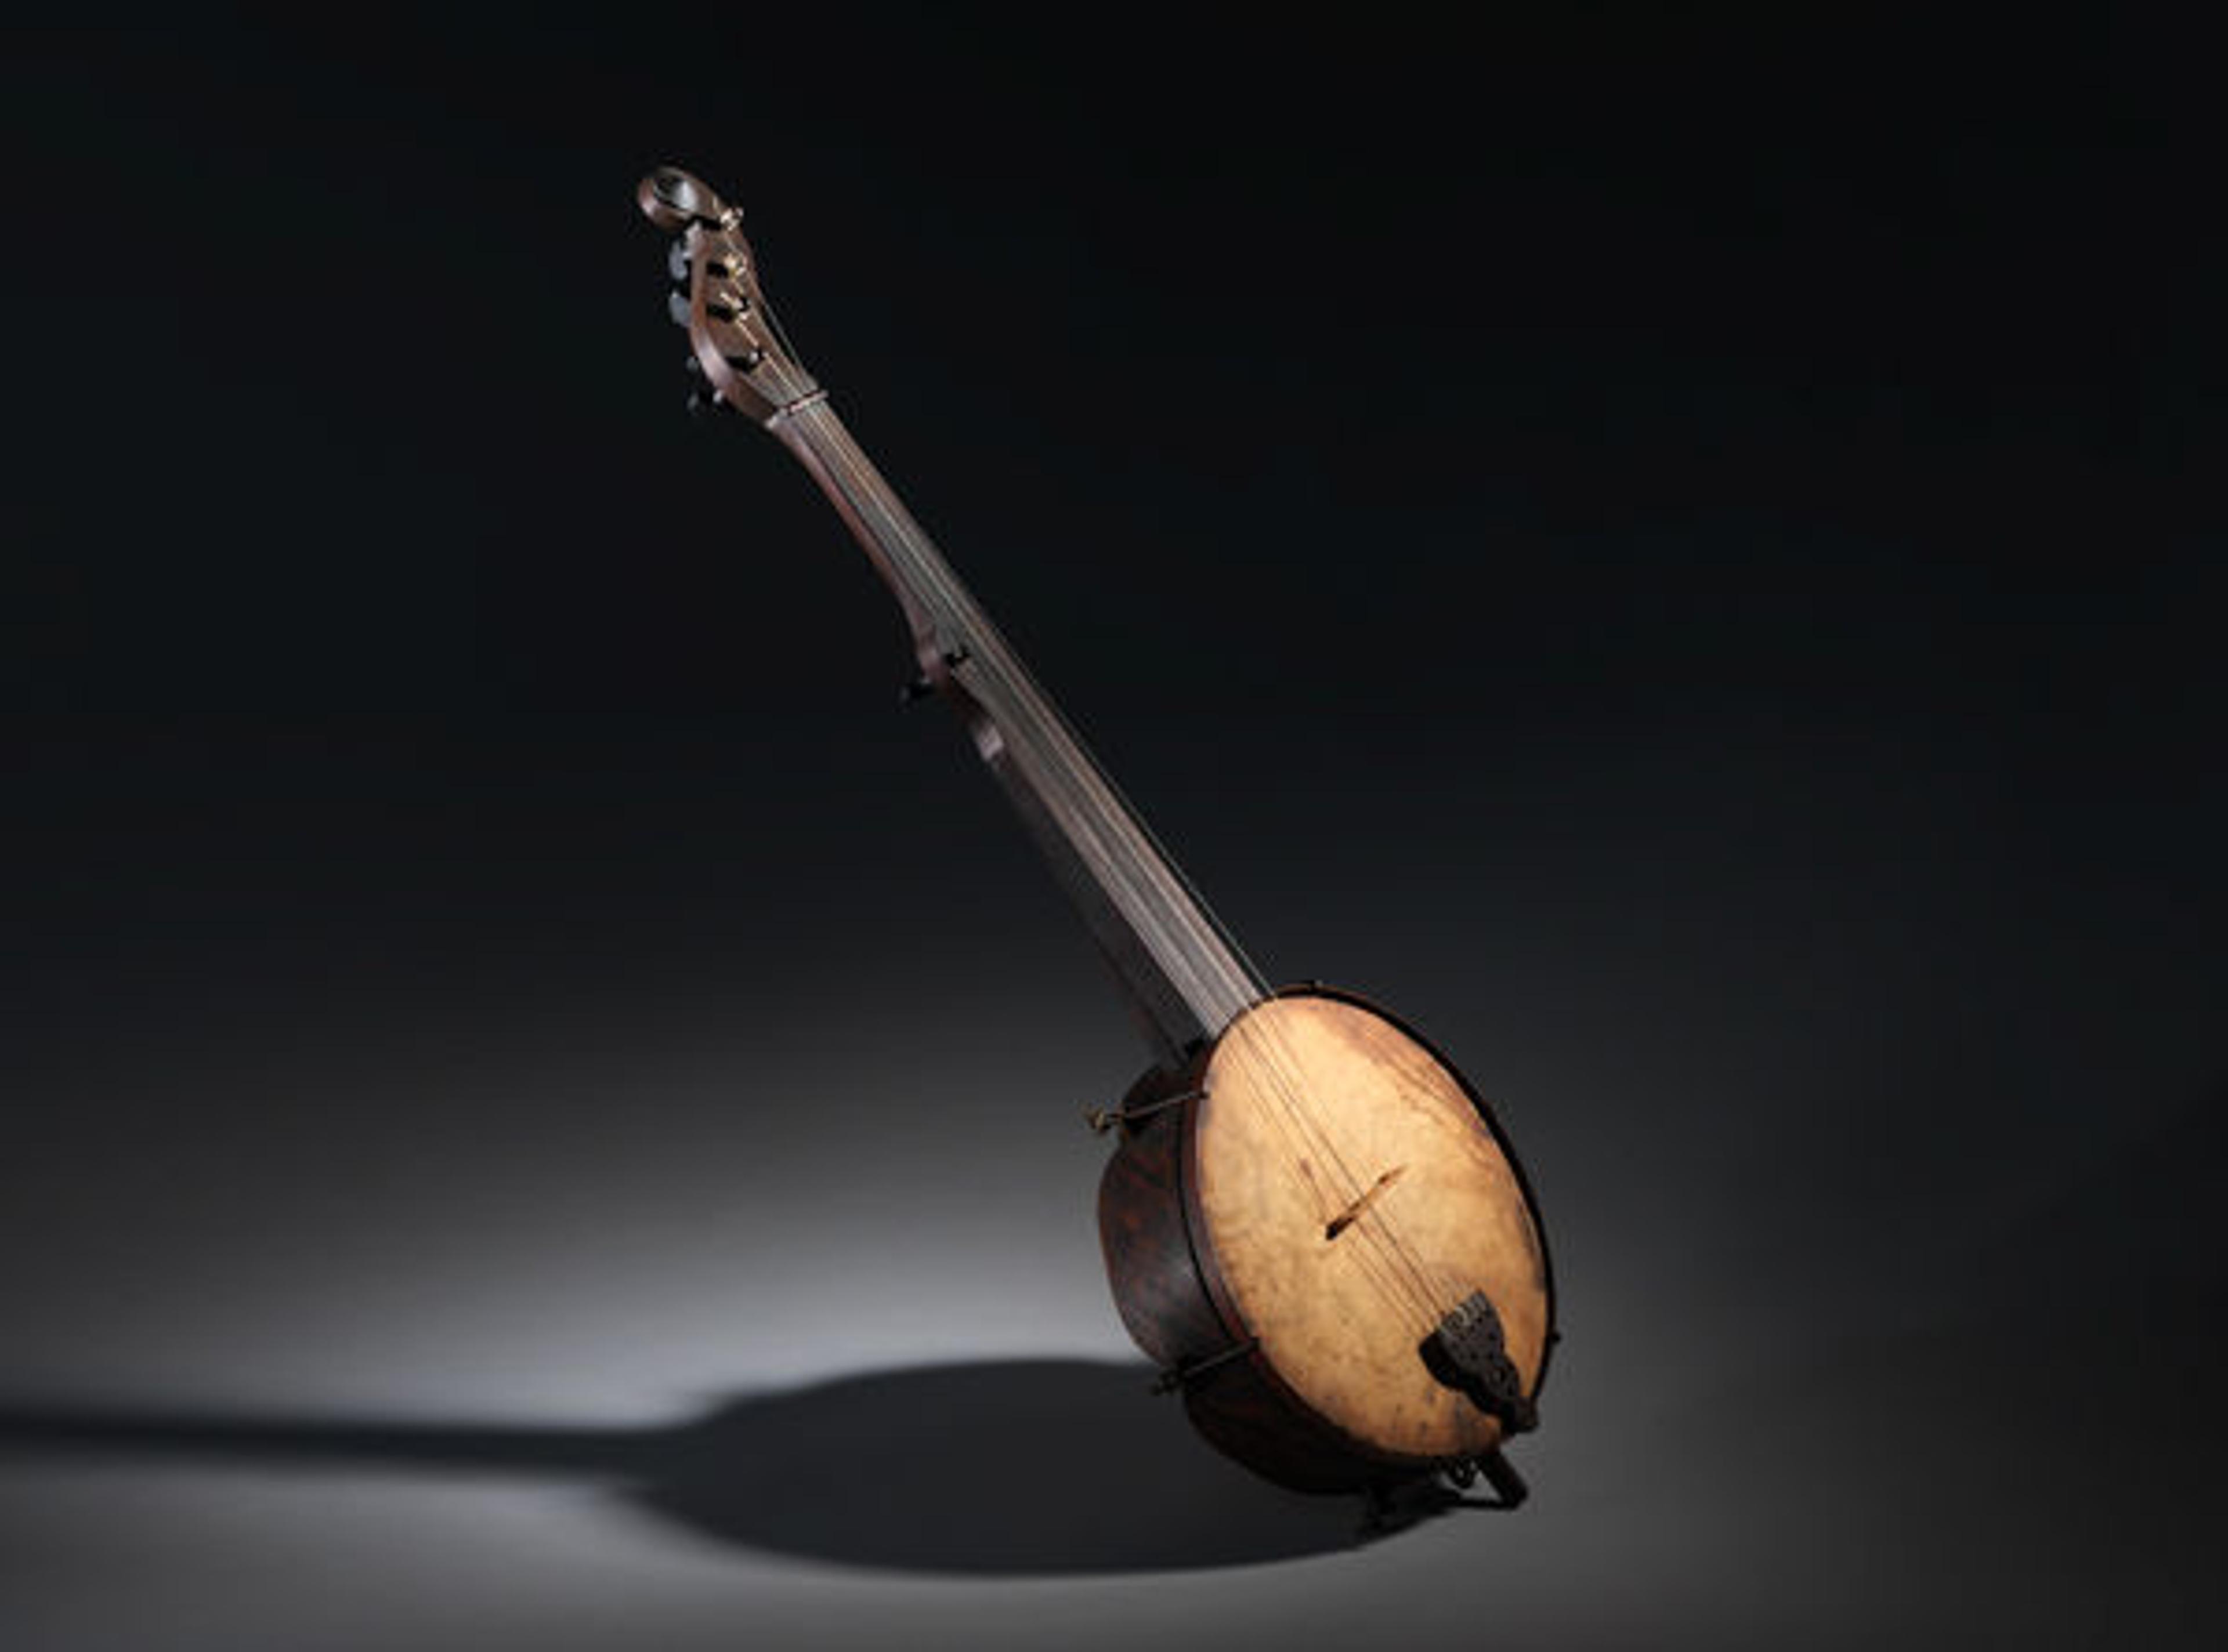 Recent Acquisition: An Early American Banjo - The Metropolitan Museum of Art